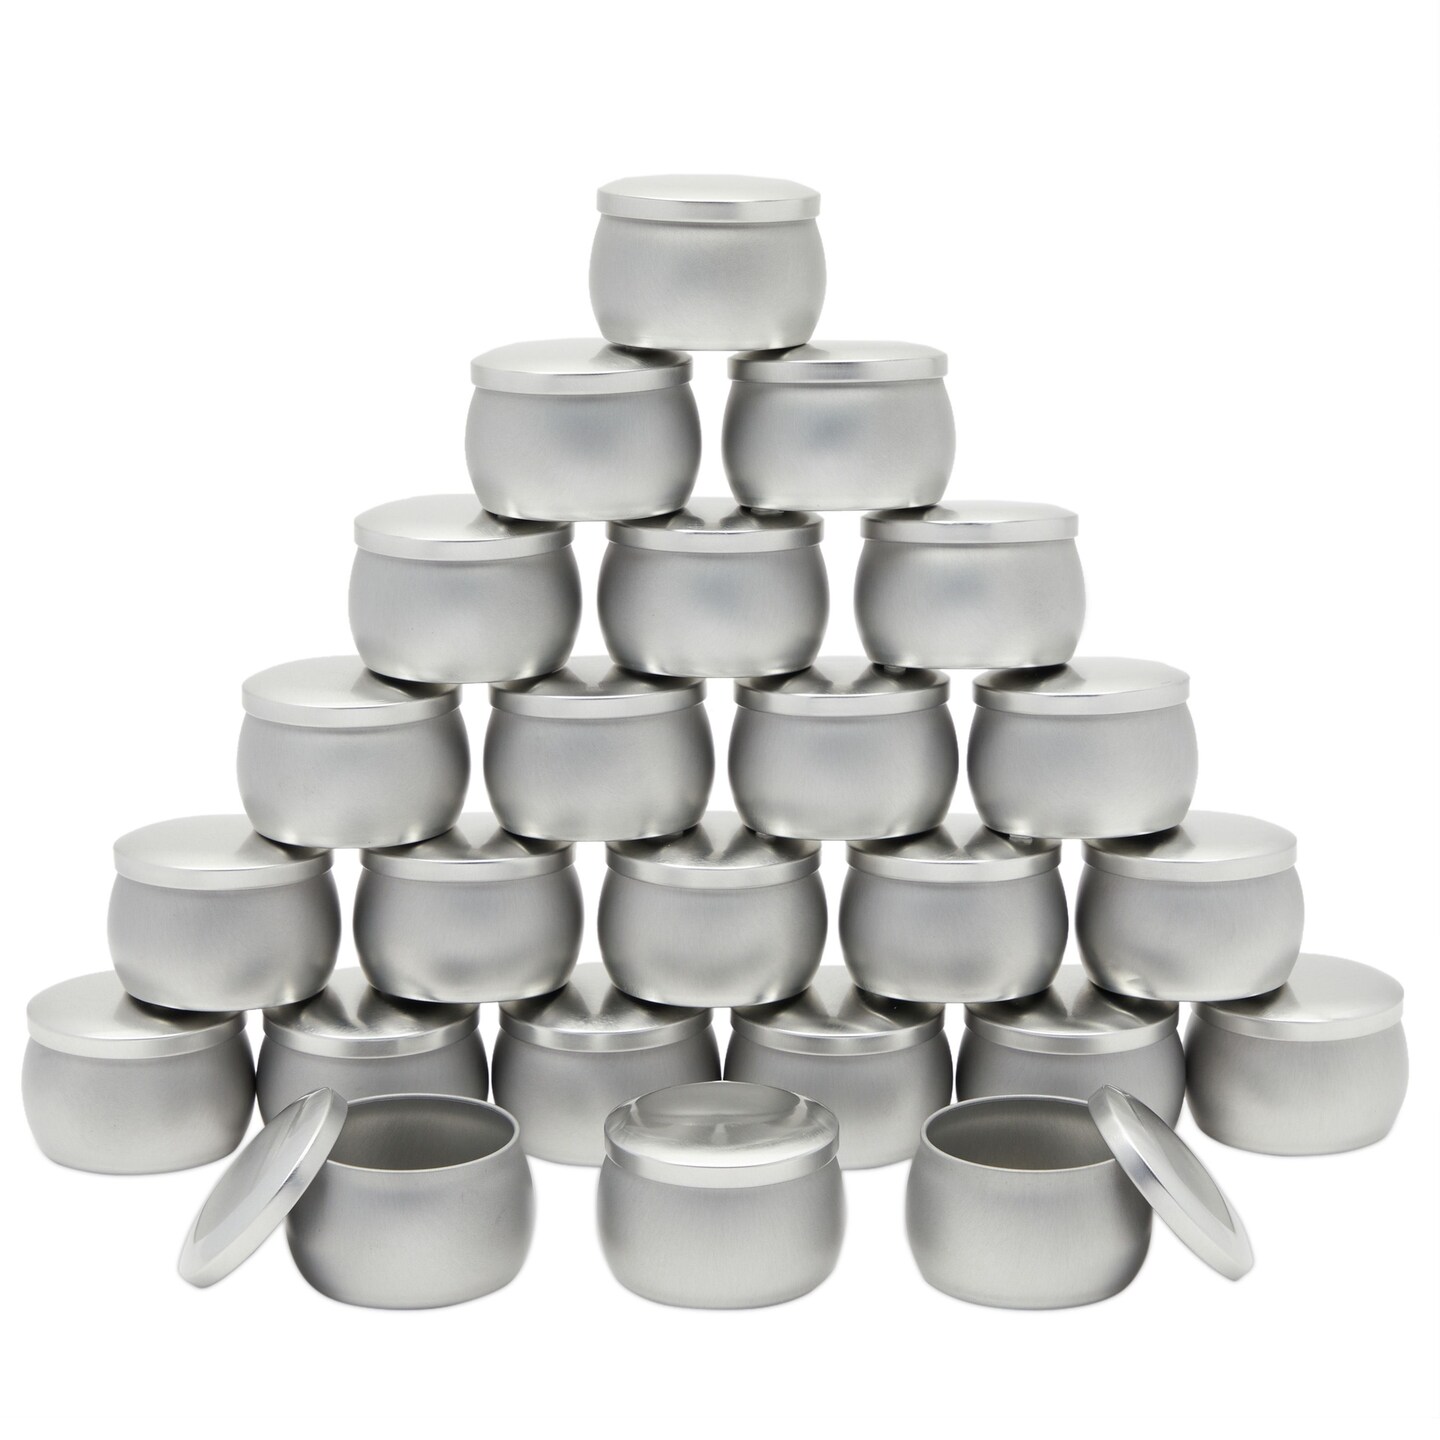 Hearth & Harbor Tin Candle Jars for Making Candles - 8 oz, 24 Pcs DIY Candle Containers with Lids - Metal Candle Jars - Bulk Tins Storage for Candle 